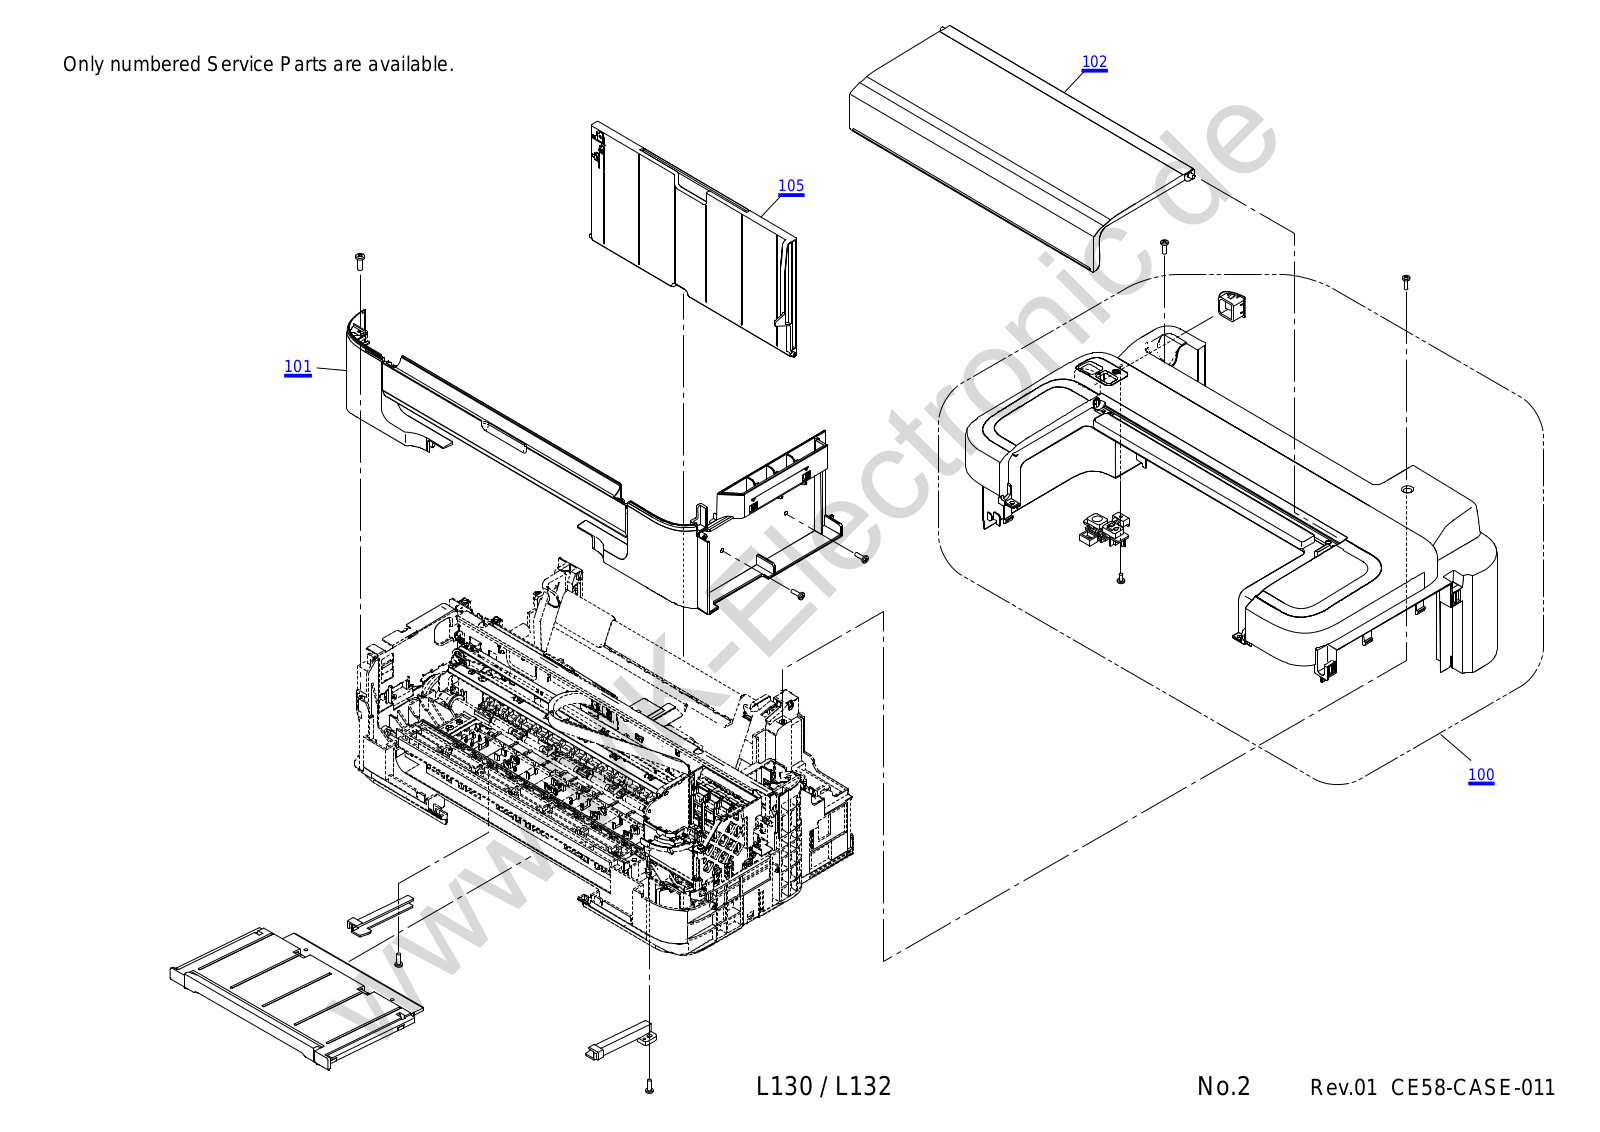 Epson L130 Exploded Diagrams 5443